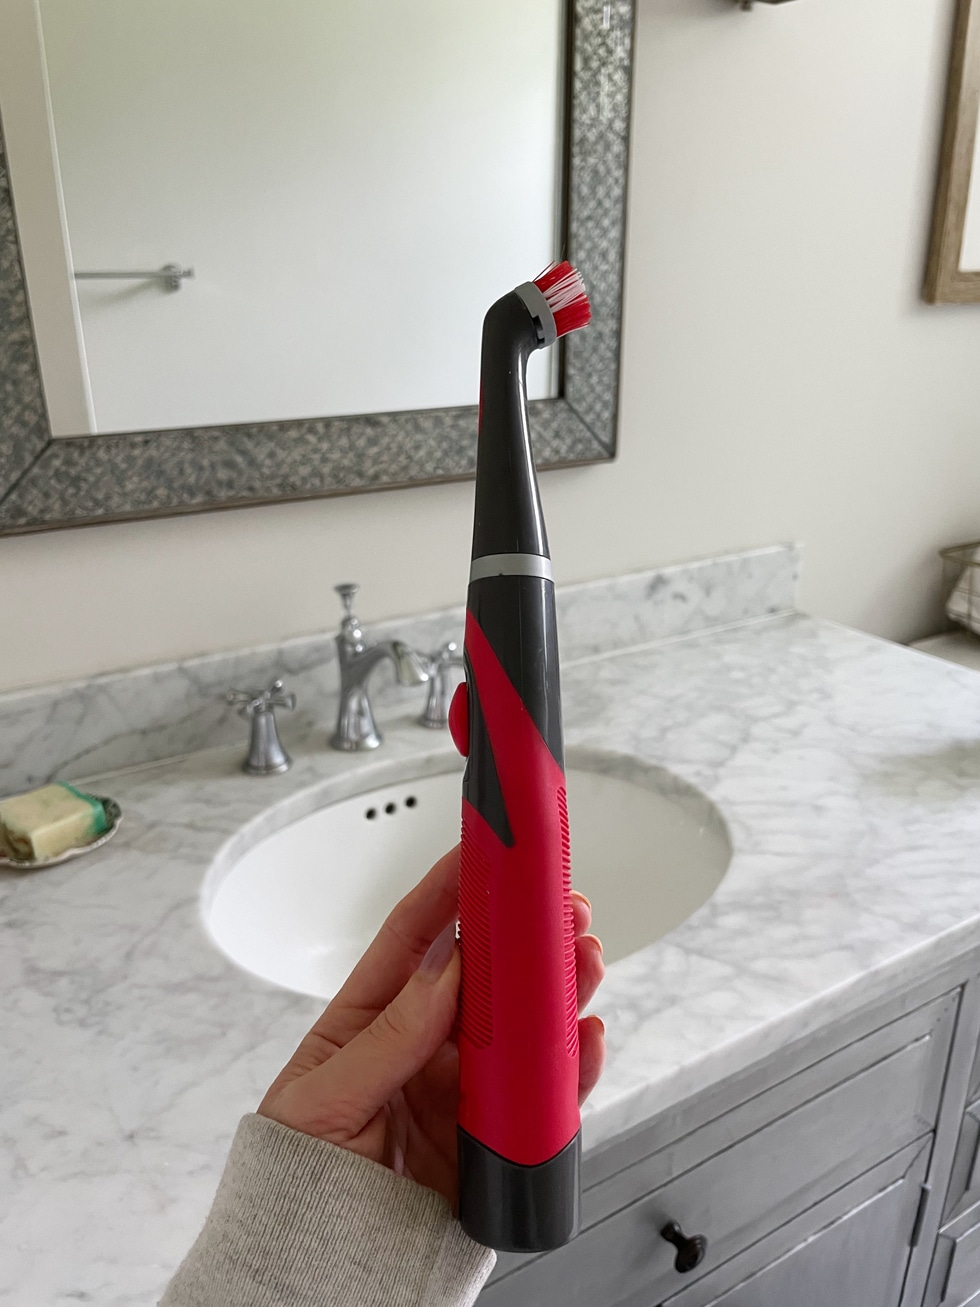 My 10 Favorite Cleaning Tools, Gadgets and HacksThat Make Life Easier!